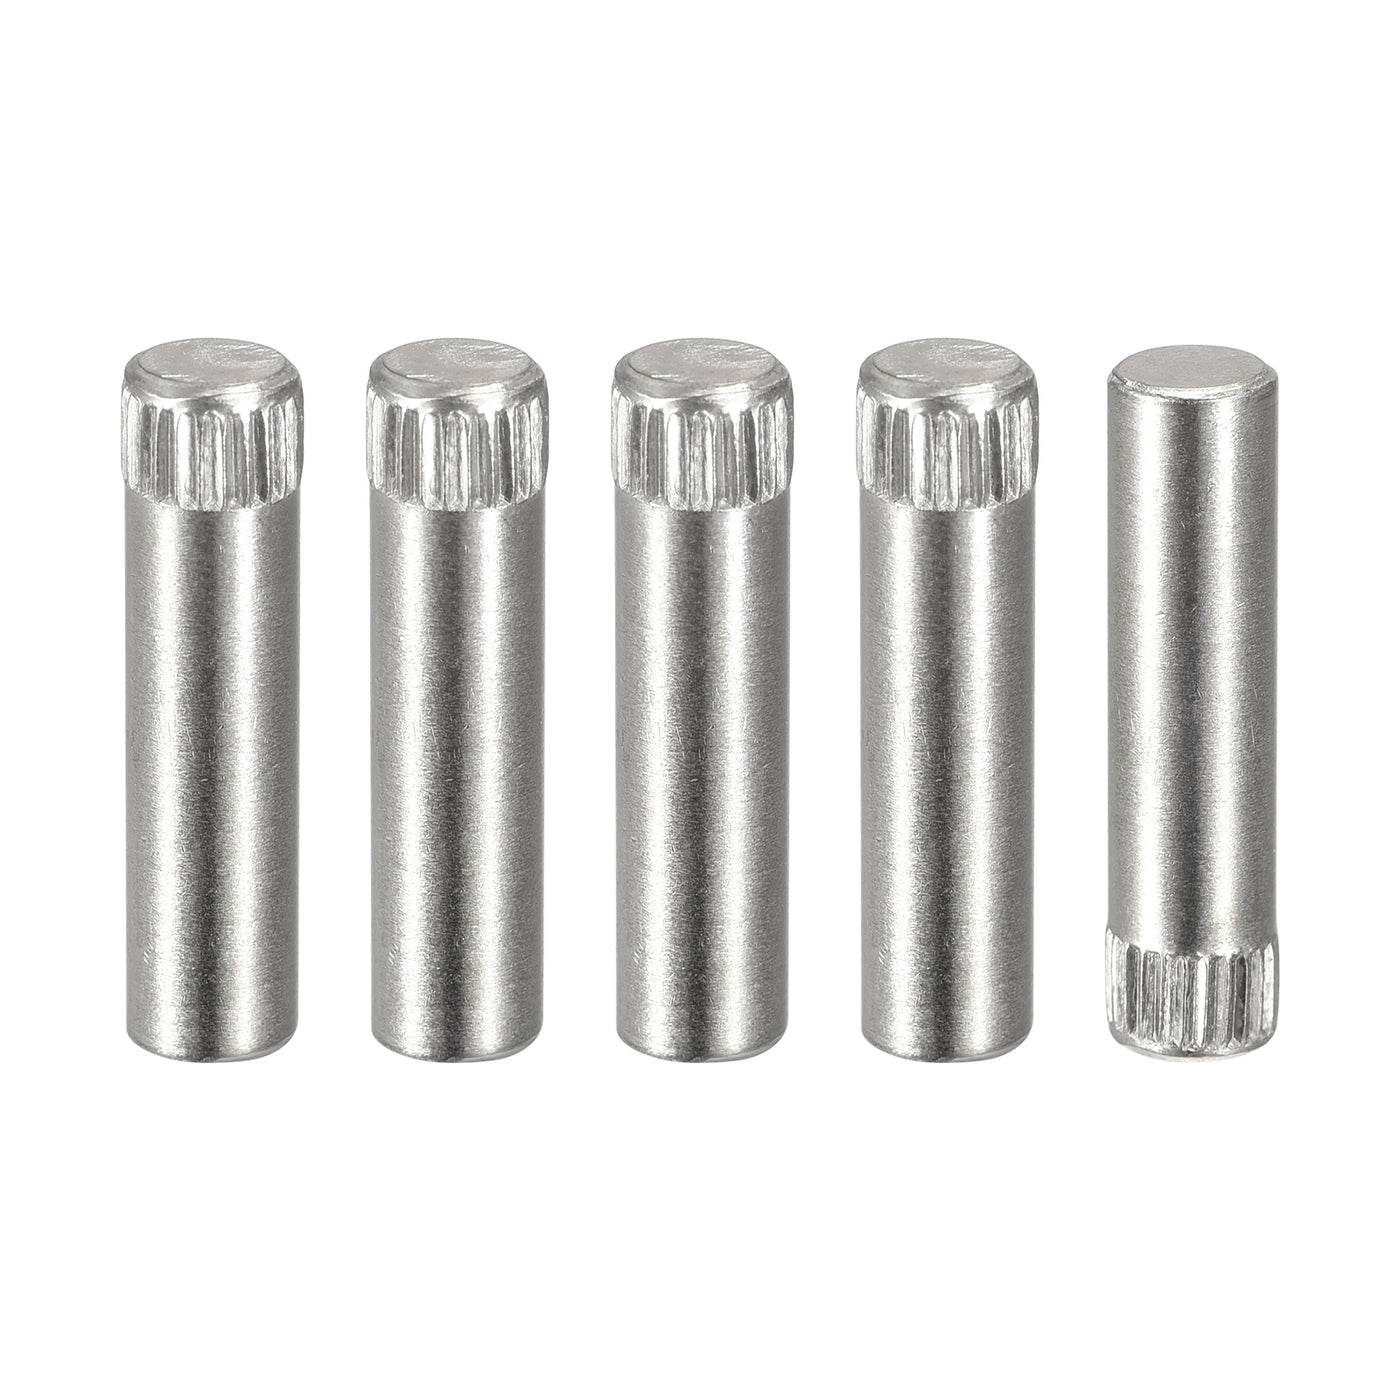 uxcell Uxcell 6x25mm 304 Stainless Steel Dowel Pins, 5Pcs Knurled Head Flat End Dowel Pin